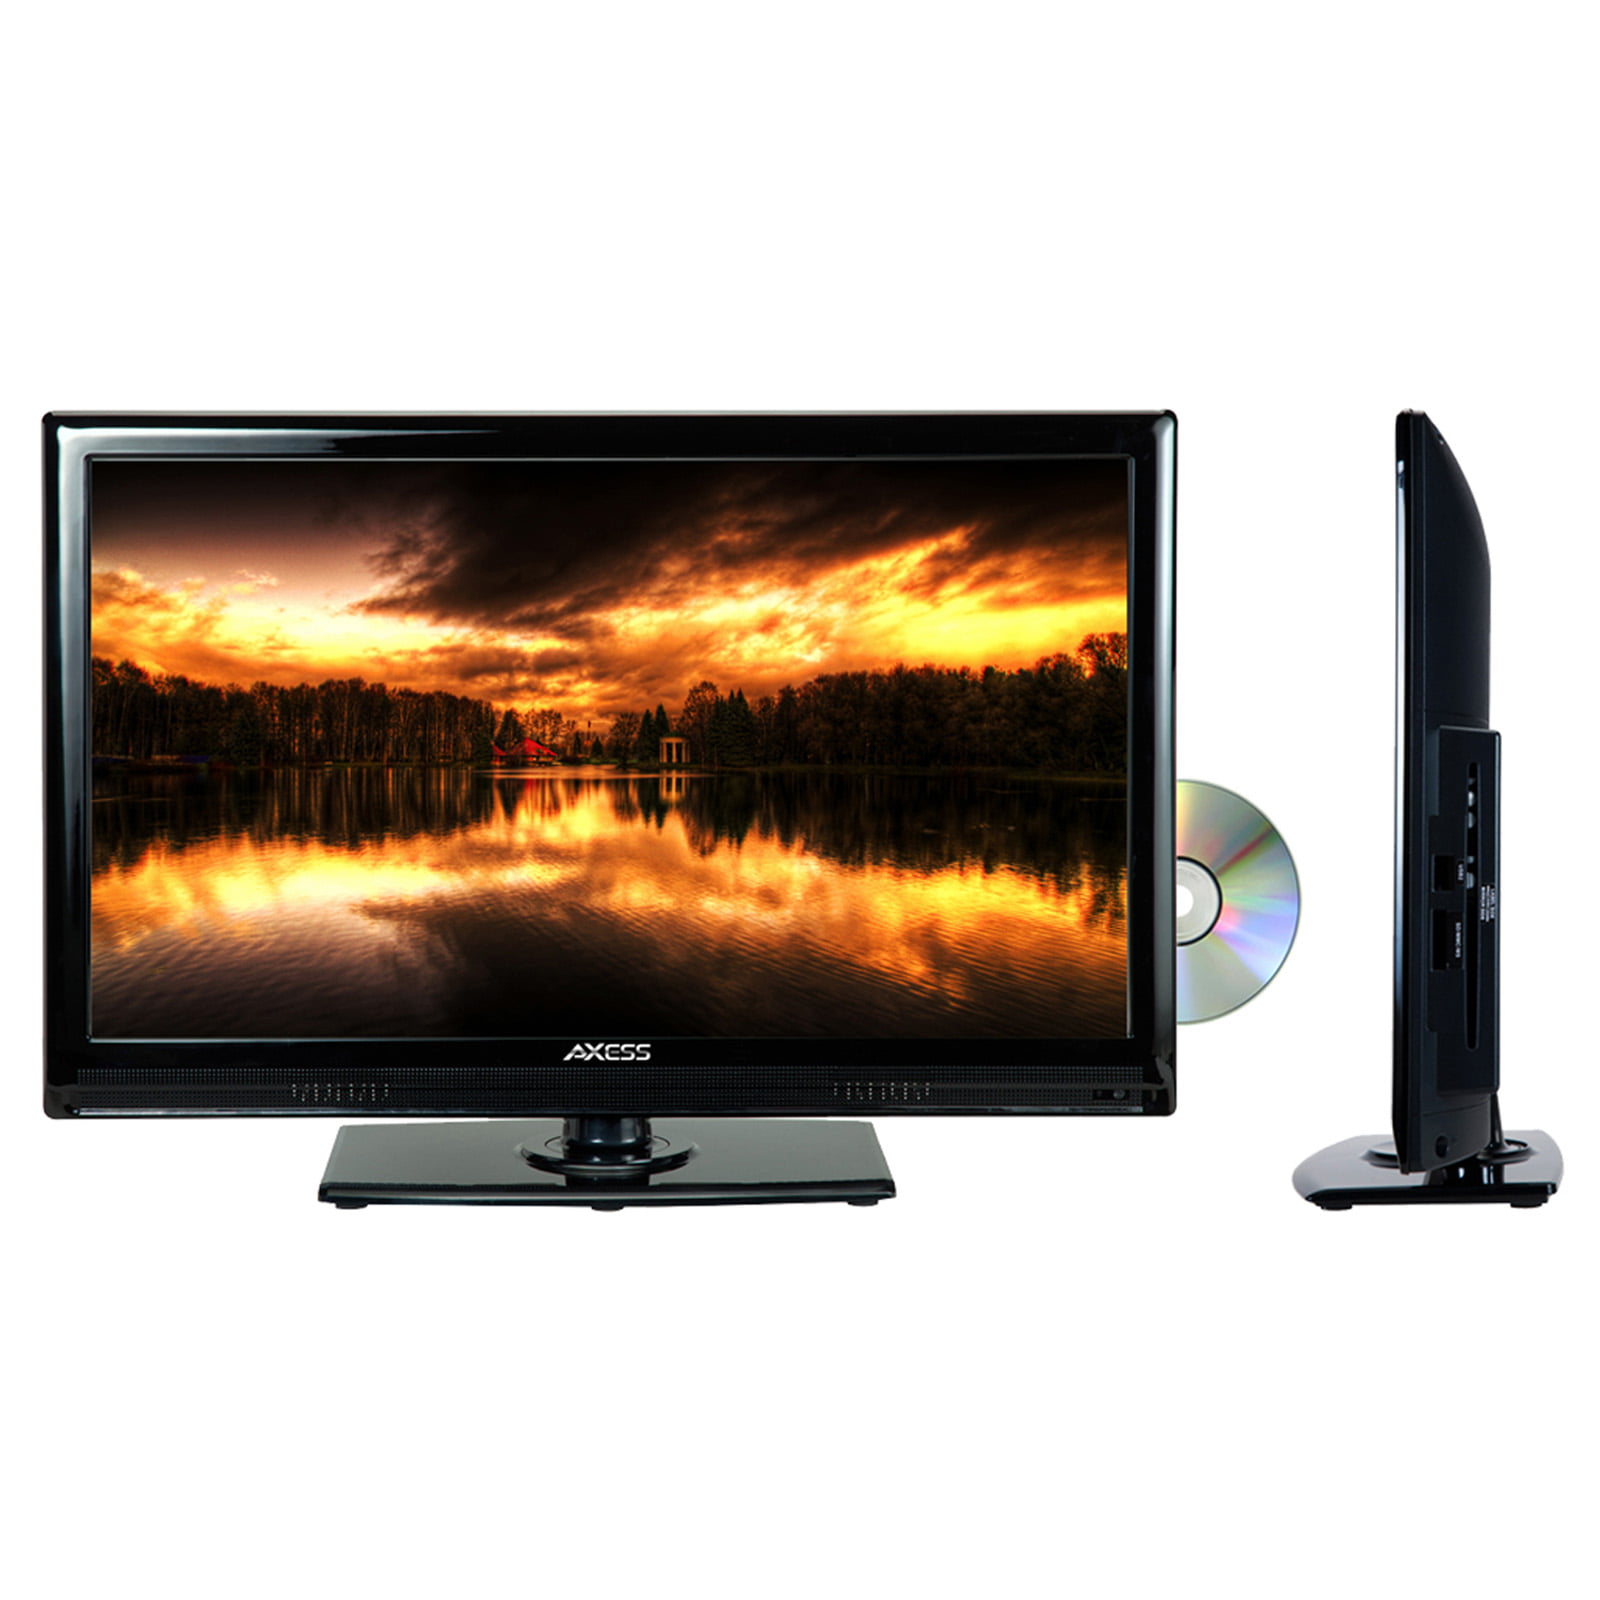 Tvd1801 22 22 Led Ac Dc Tv With Dvd Player Full Hd With Hdmi Sd Card Reader And Usb Walmart Com Walmart Com